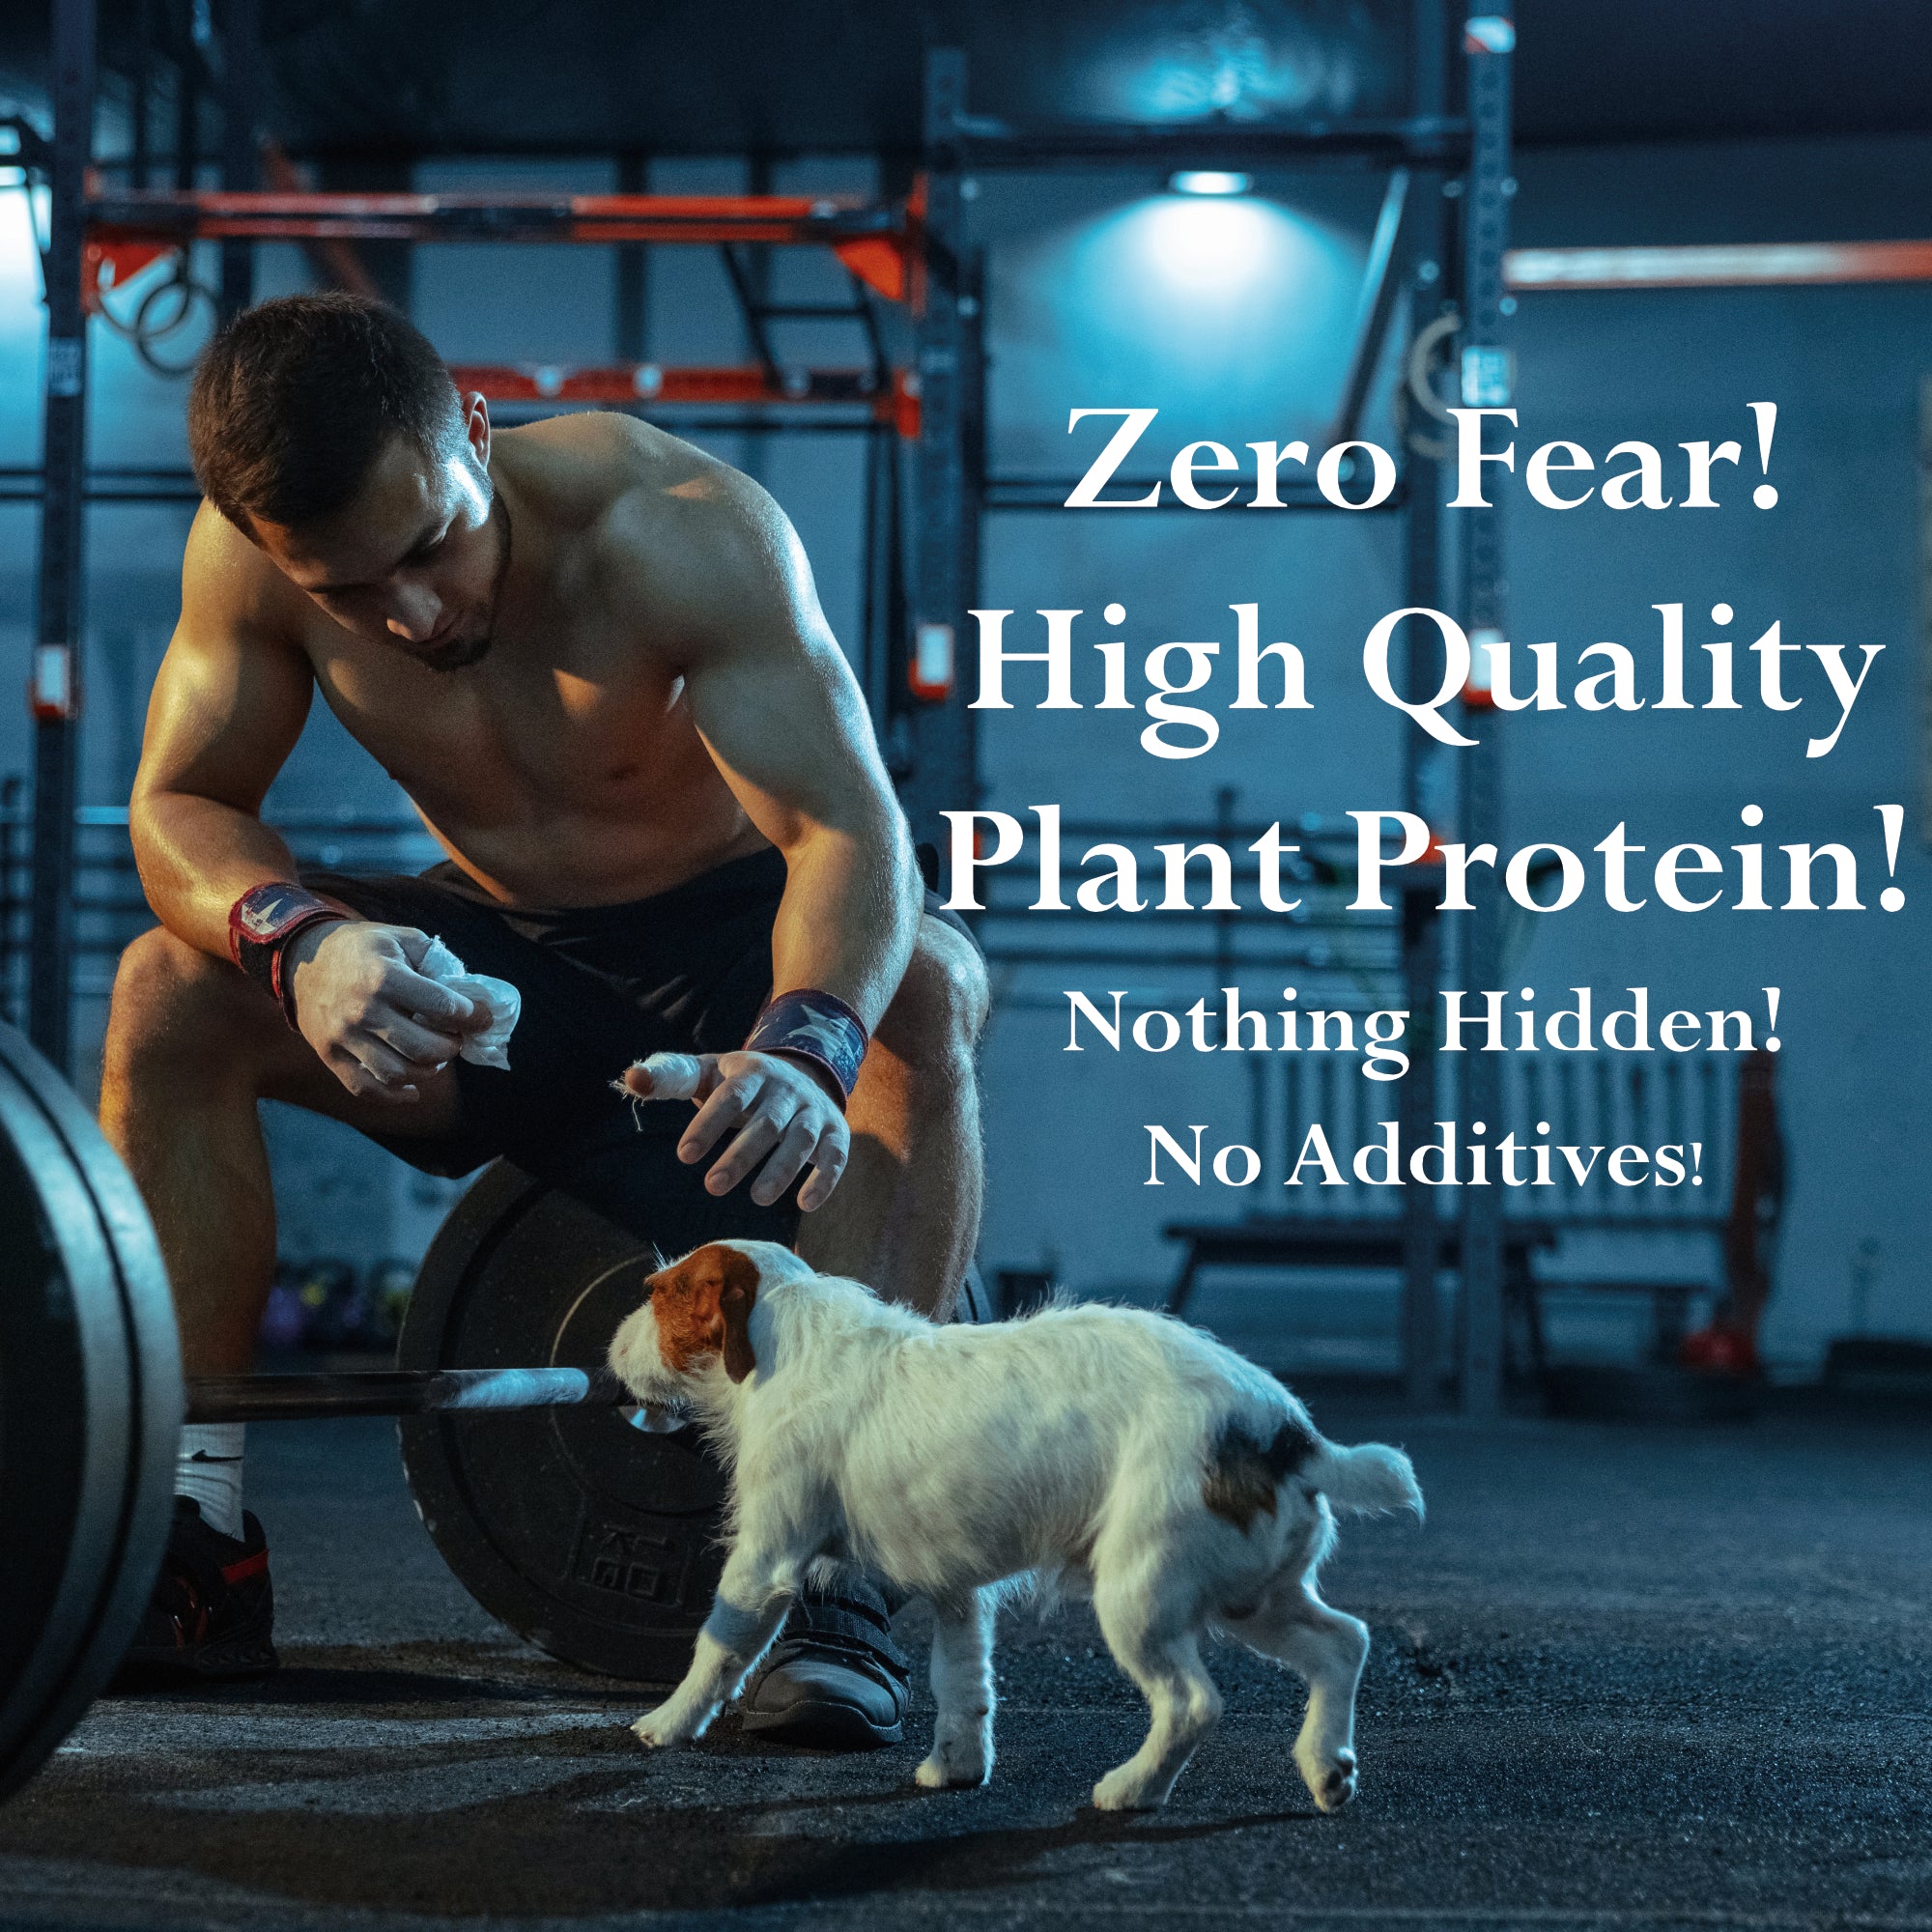 Pea Protein Powder Organic - 82% Plant Protein, No Additives, Unsweetened